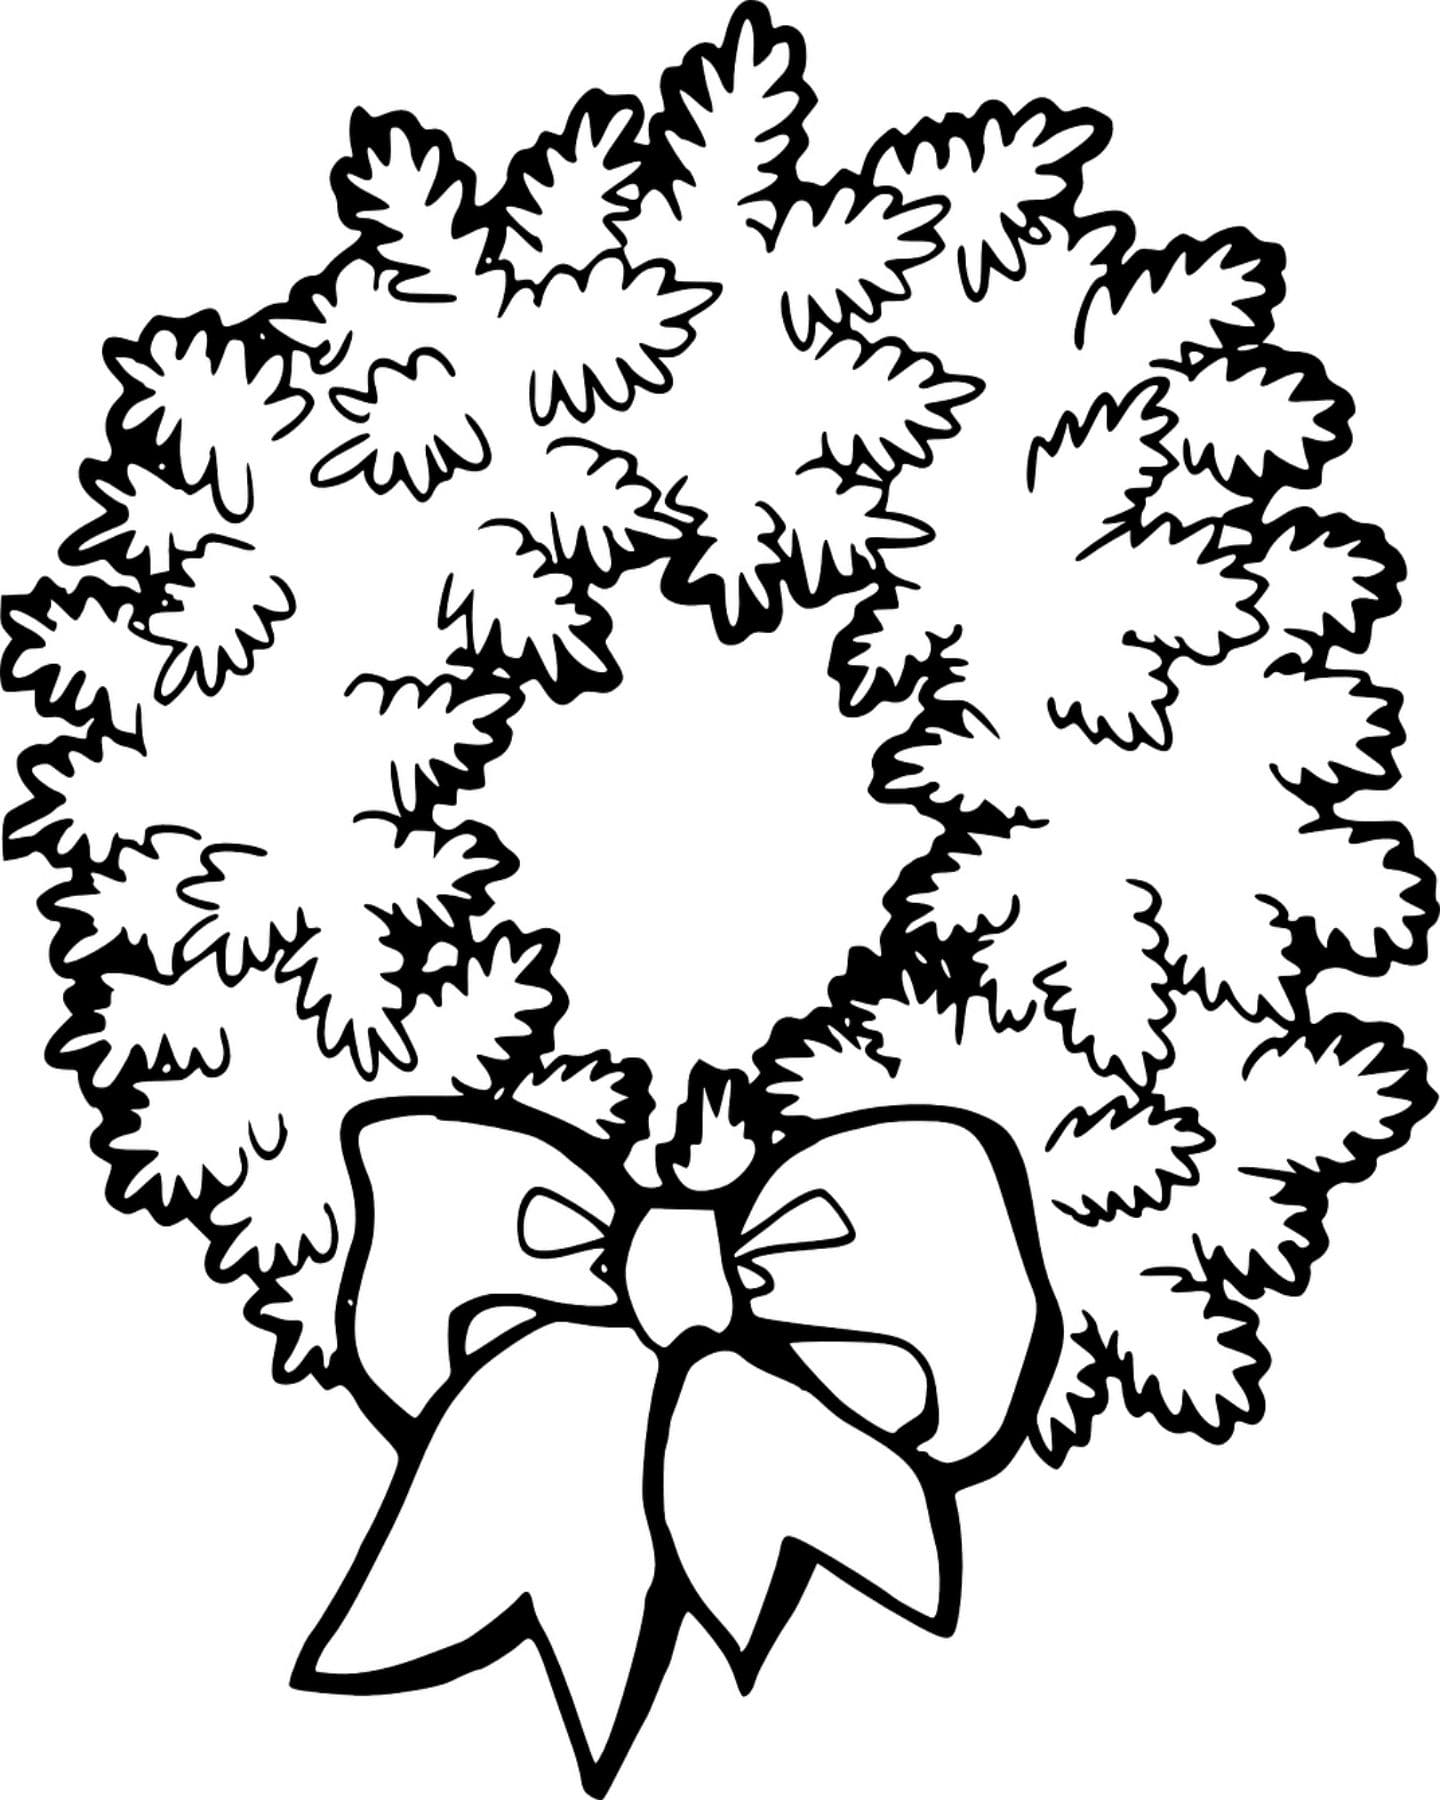 Fluffy Christmas Wreath Coloring Page